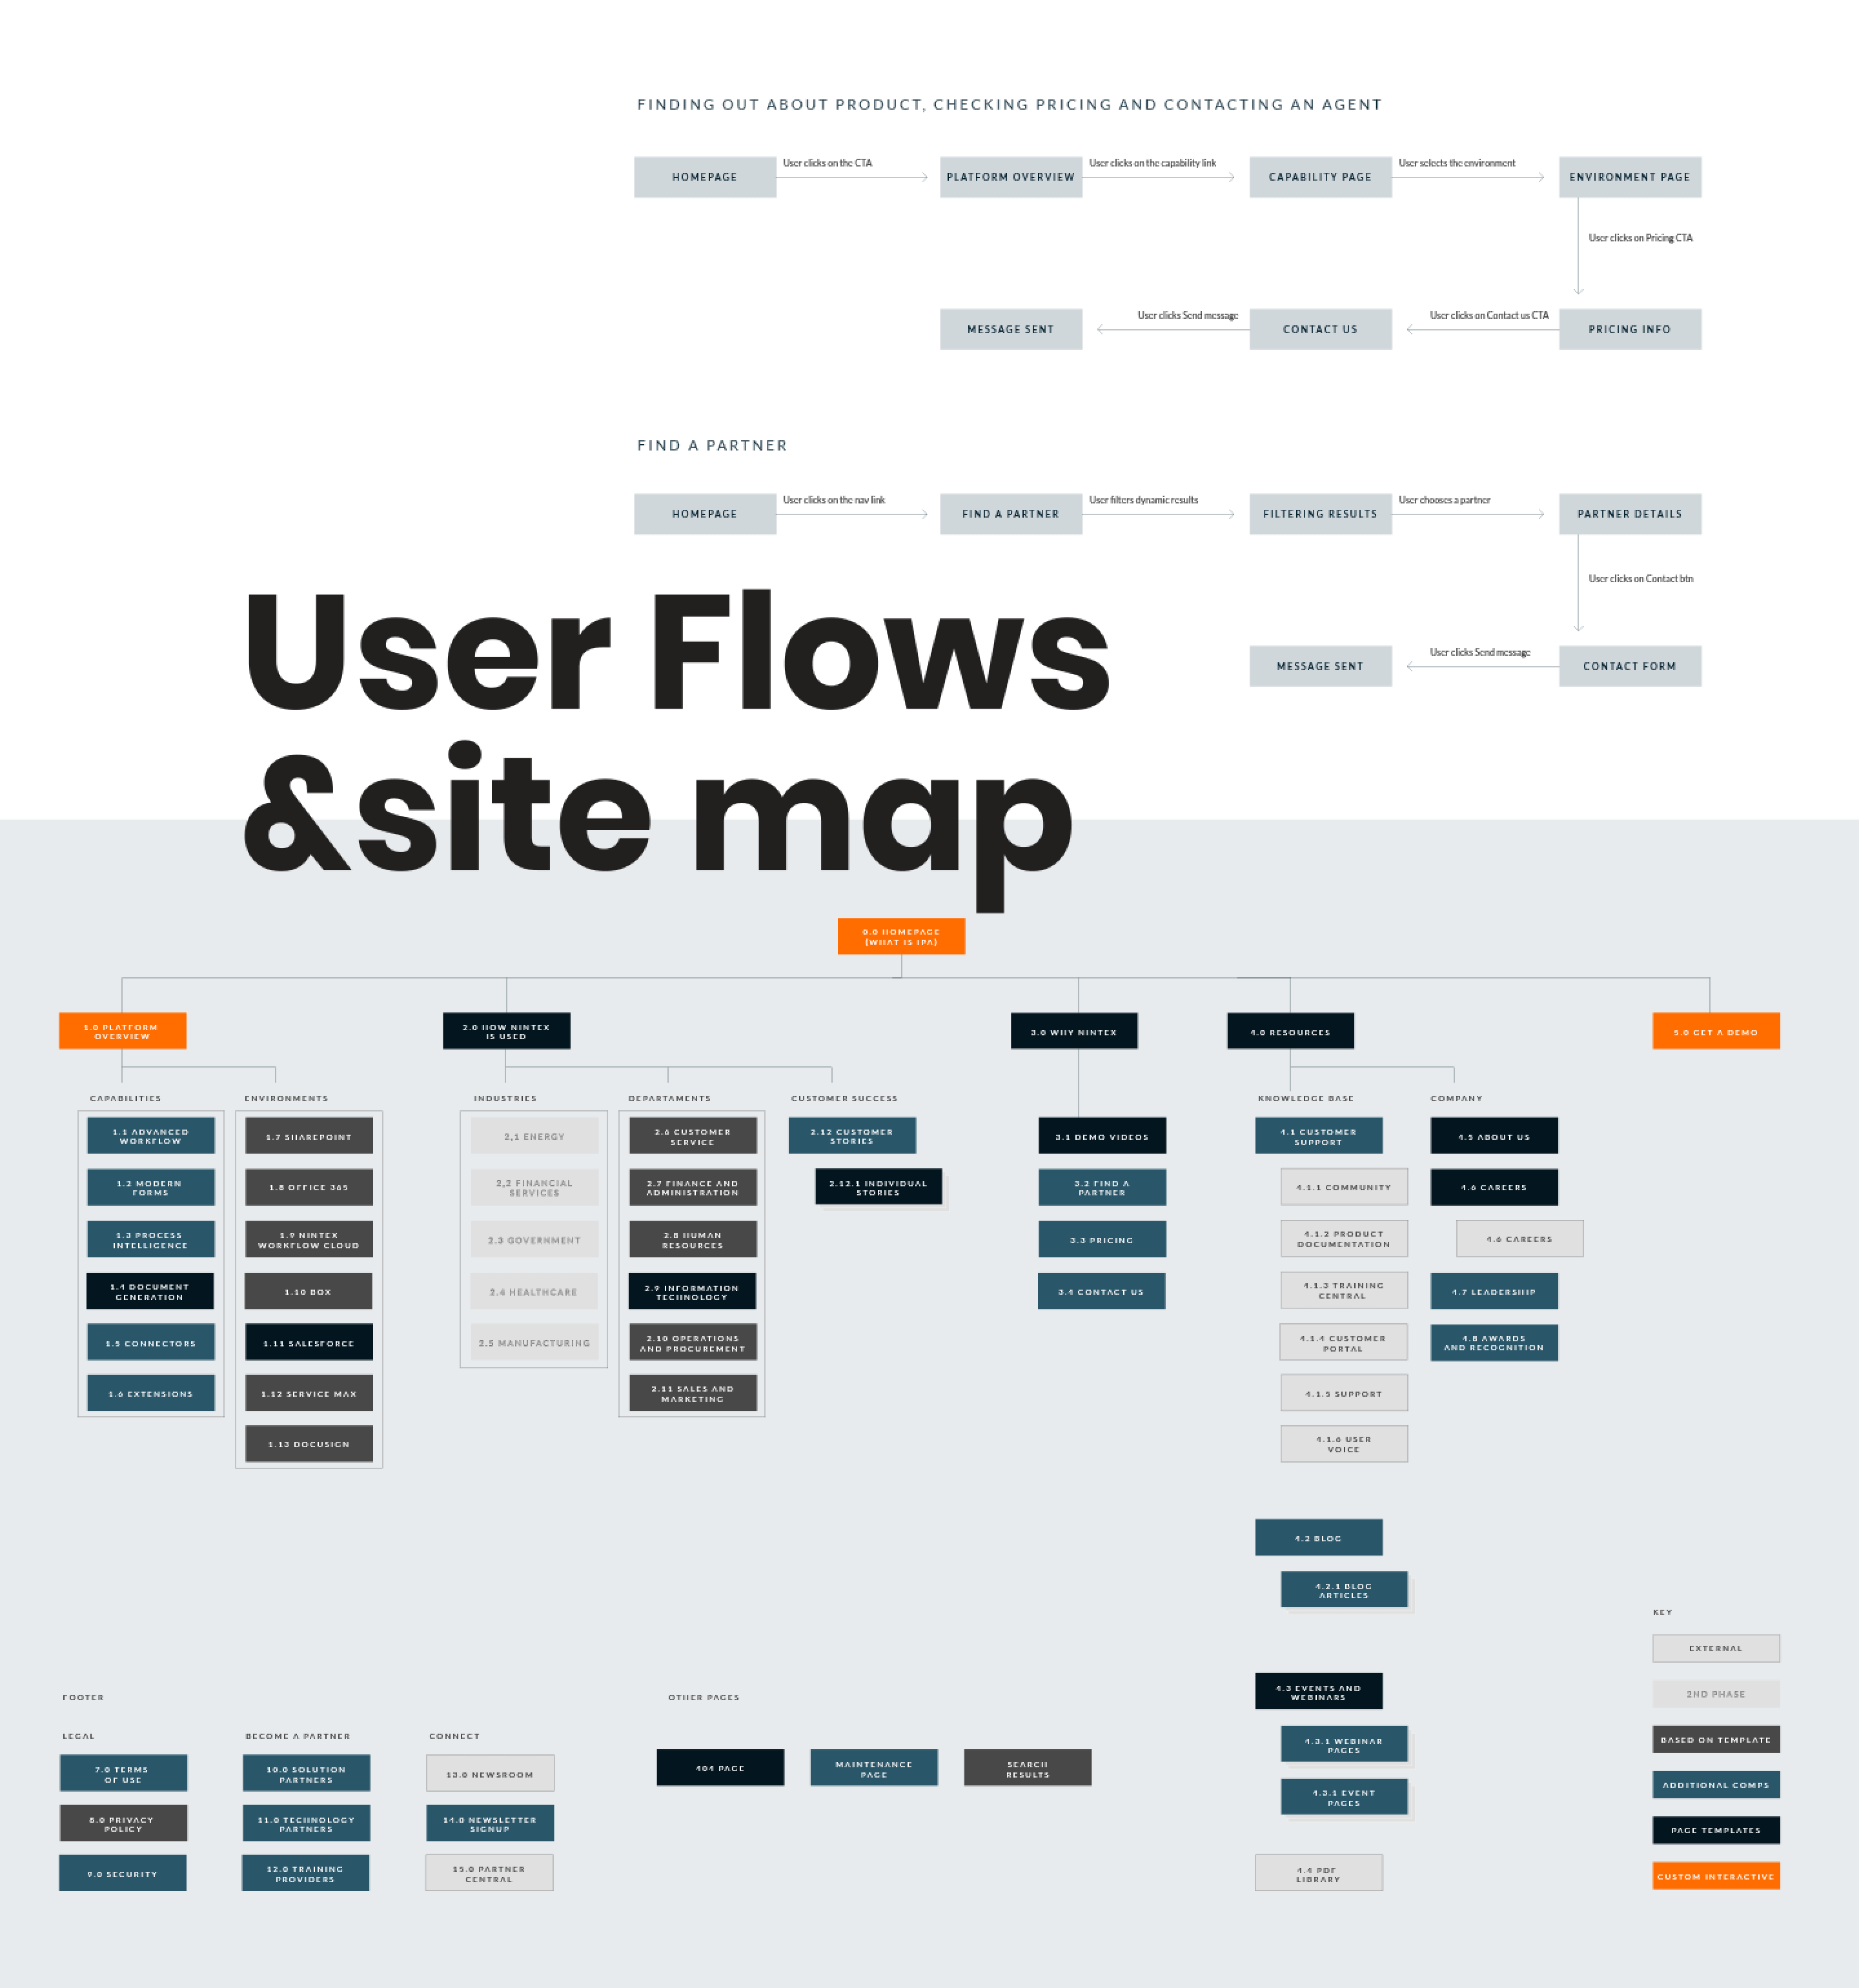 Radical simplification of user flows and site maps